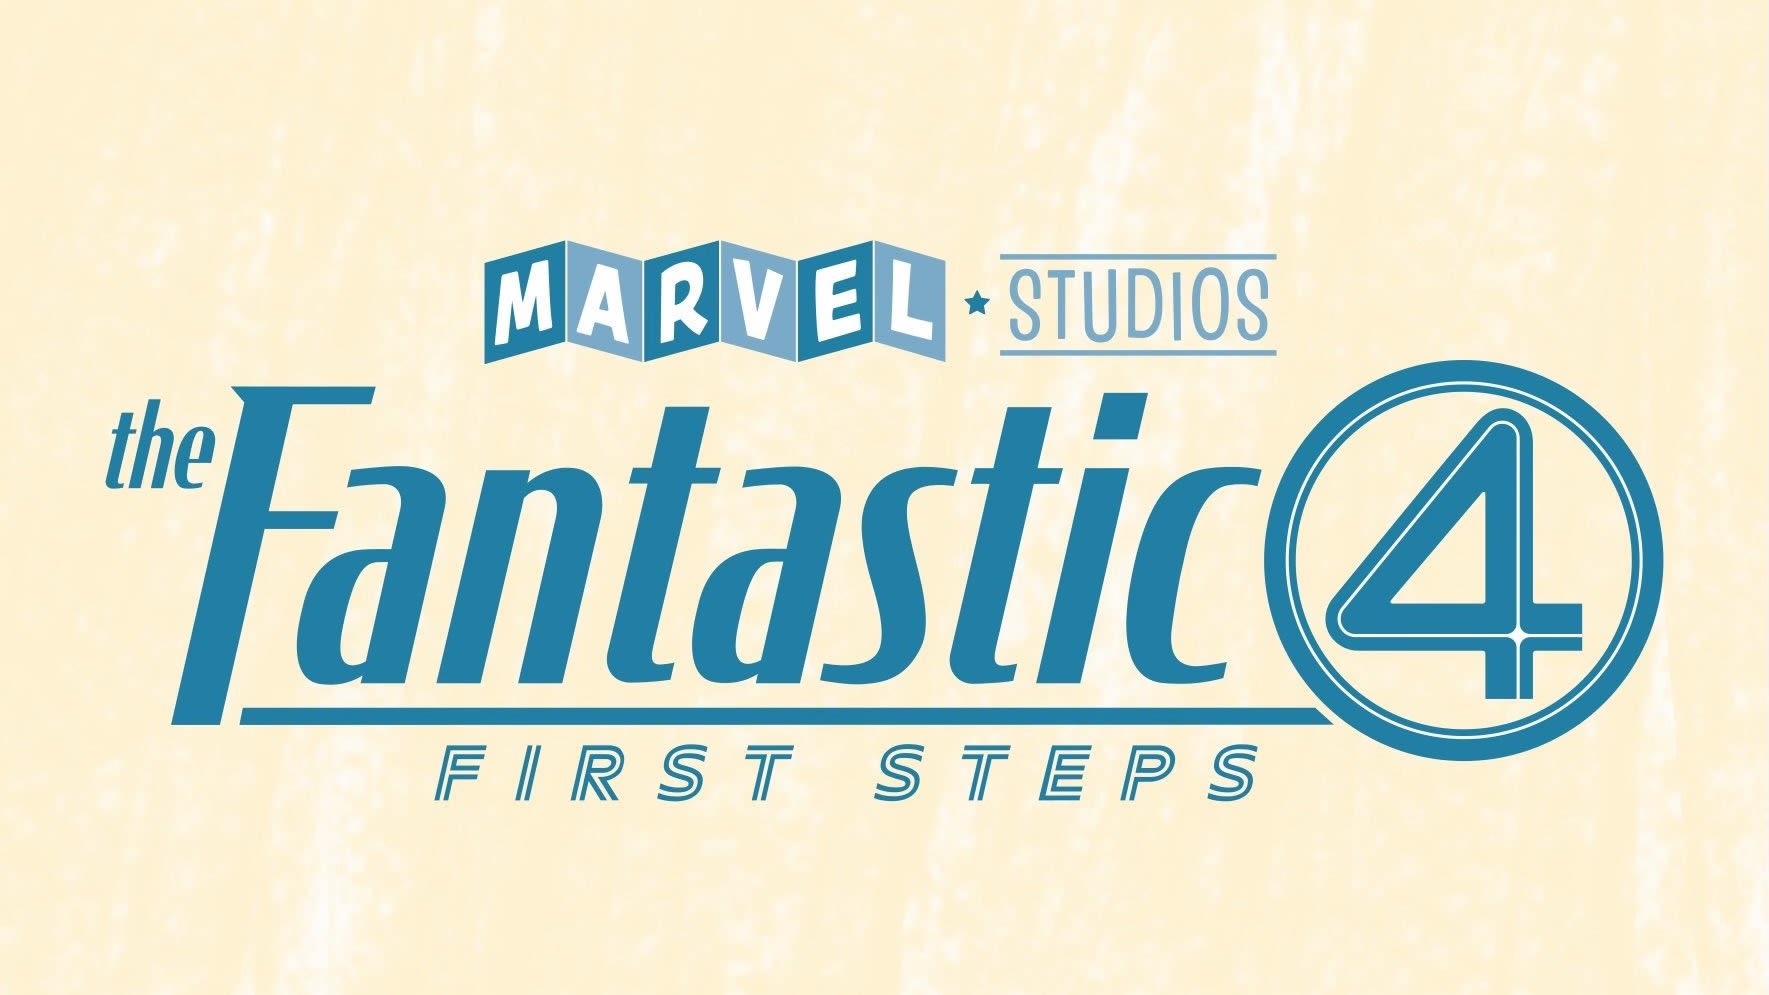 The Fantastic Four: First Steps Revealed As Official Title of New Marvel Film